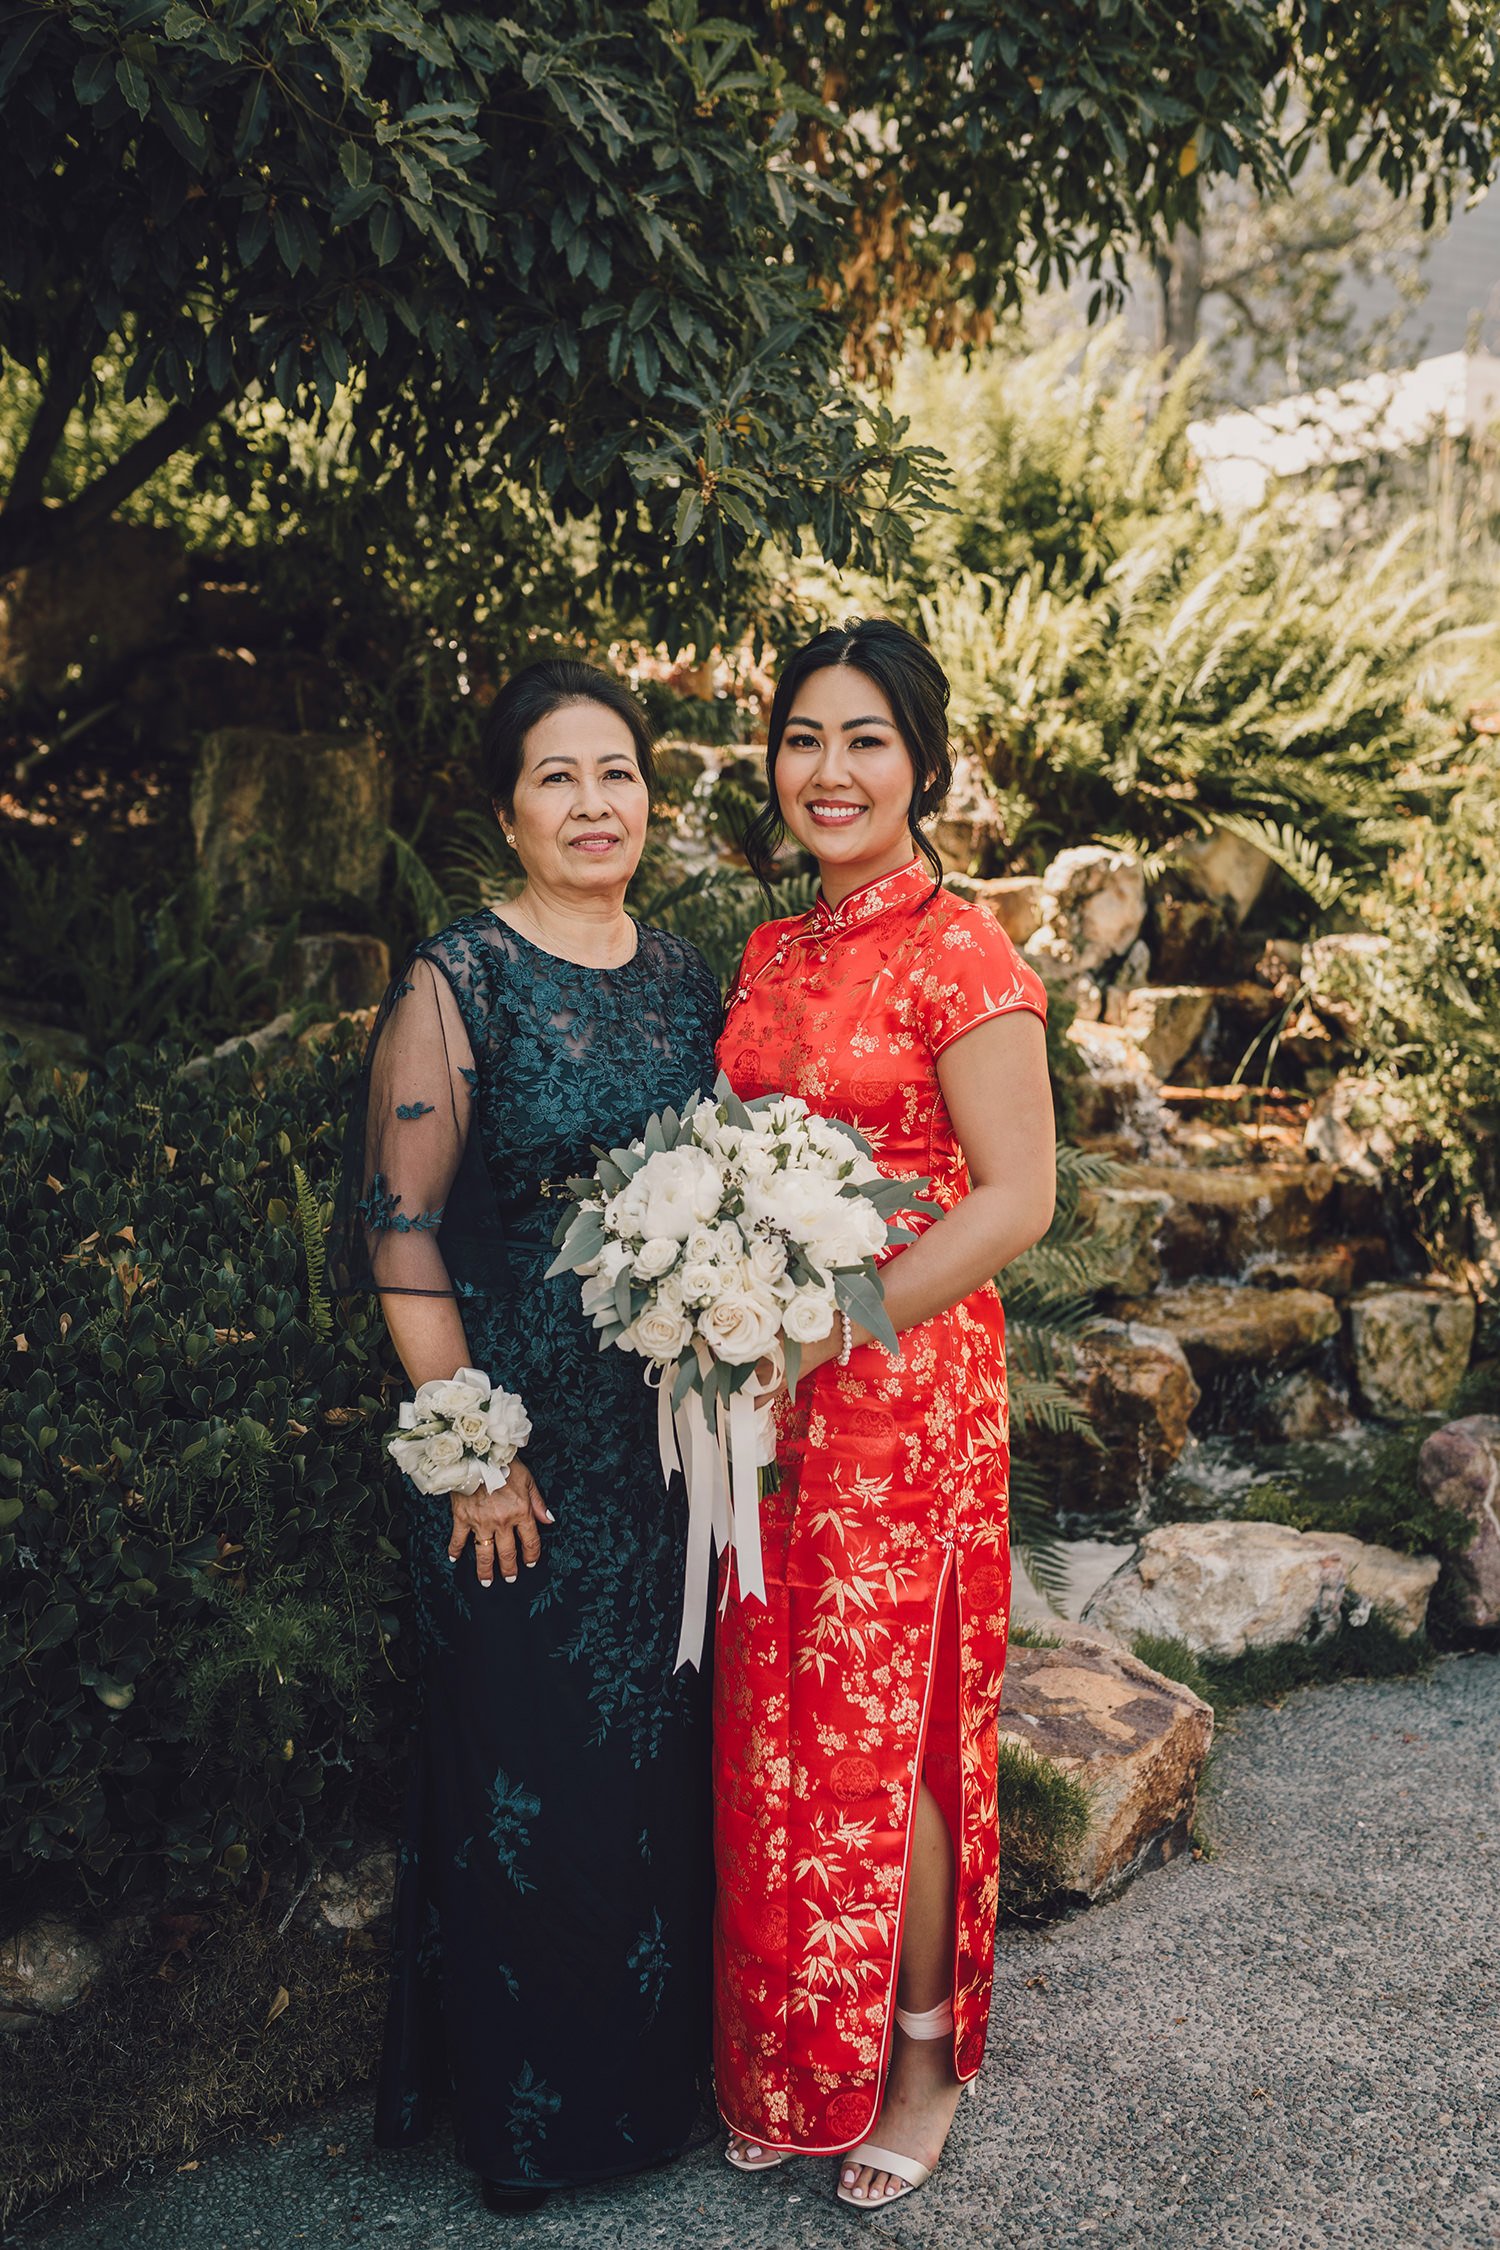 modern-asian-american-wedding-first-look-traditional-chinese-attire-socal-photographer-30.jpg